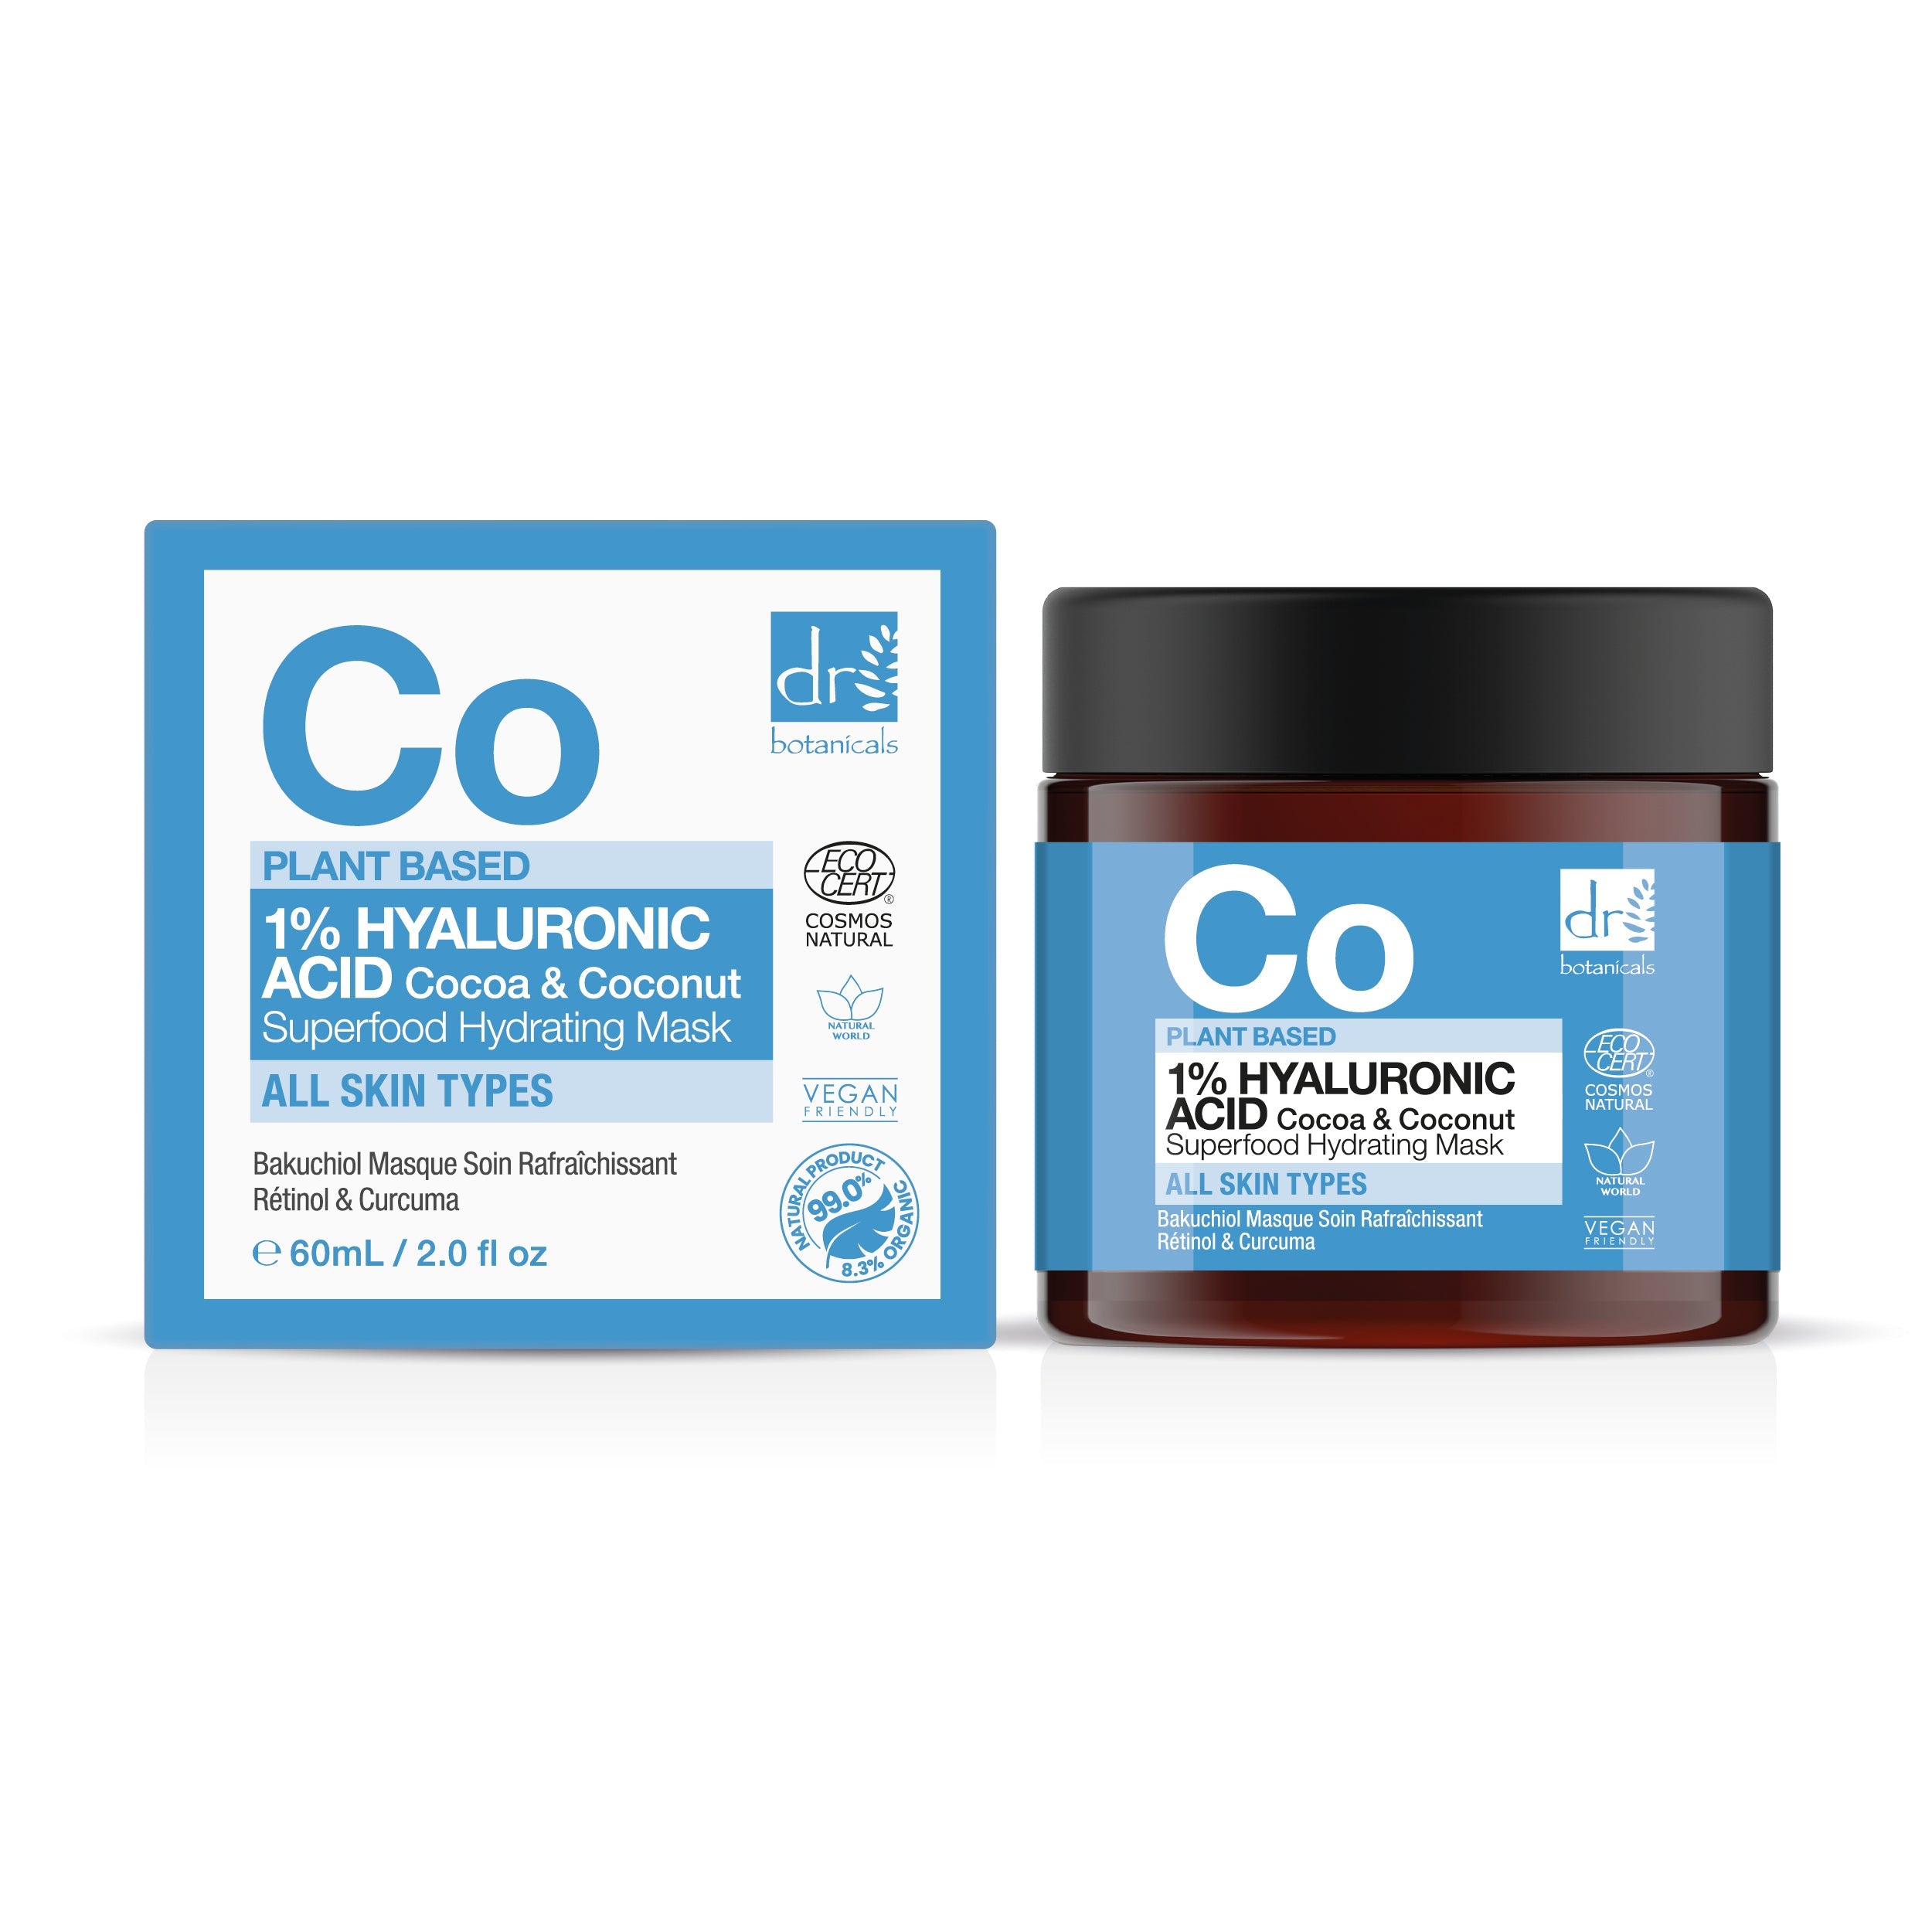 Hyaluronic Acid Cocoa & Coconut Superfood Hydrating Mask